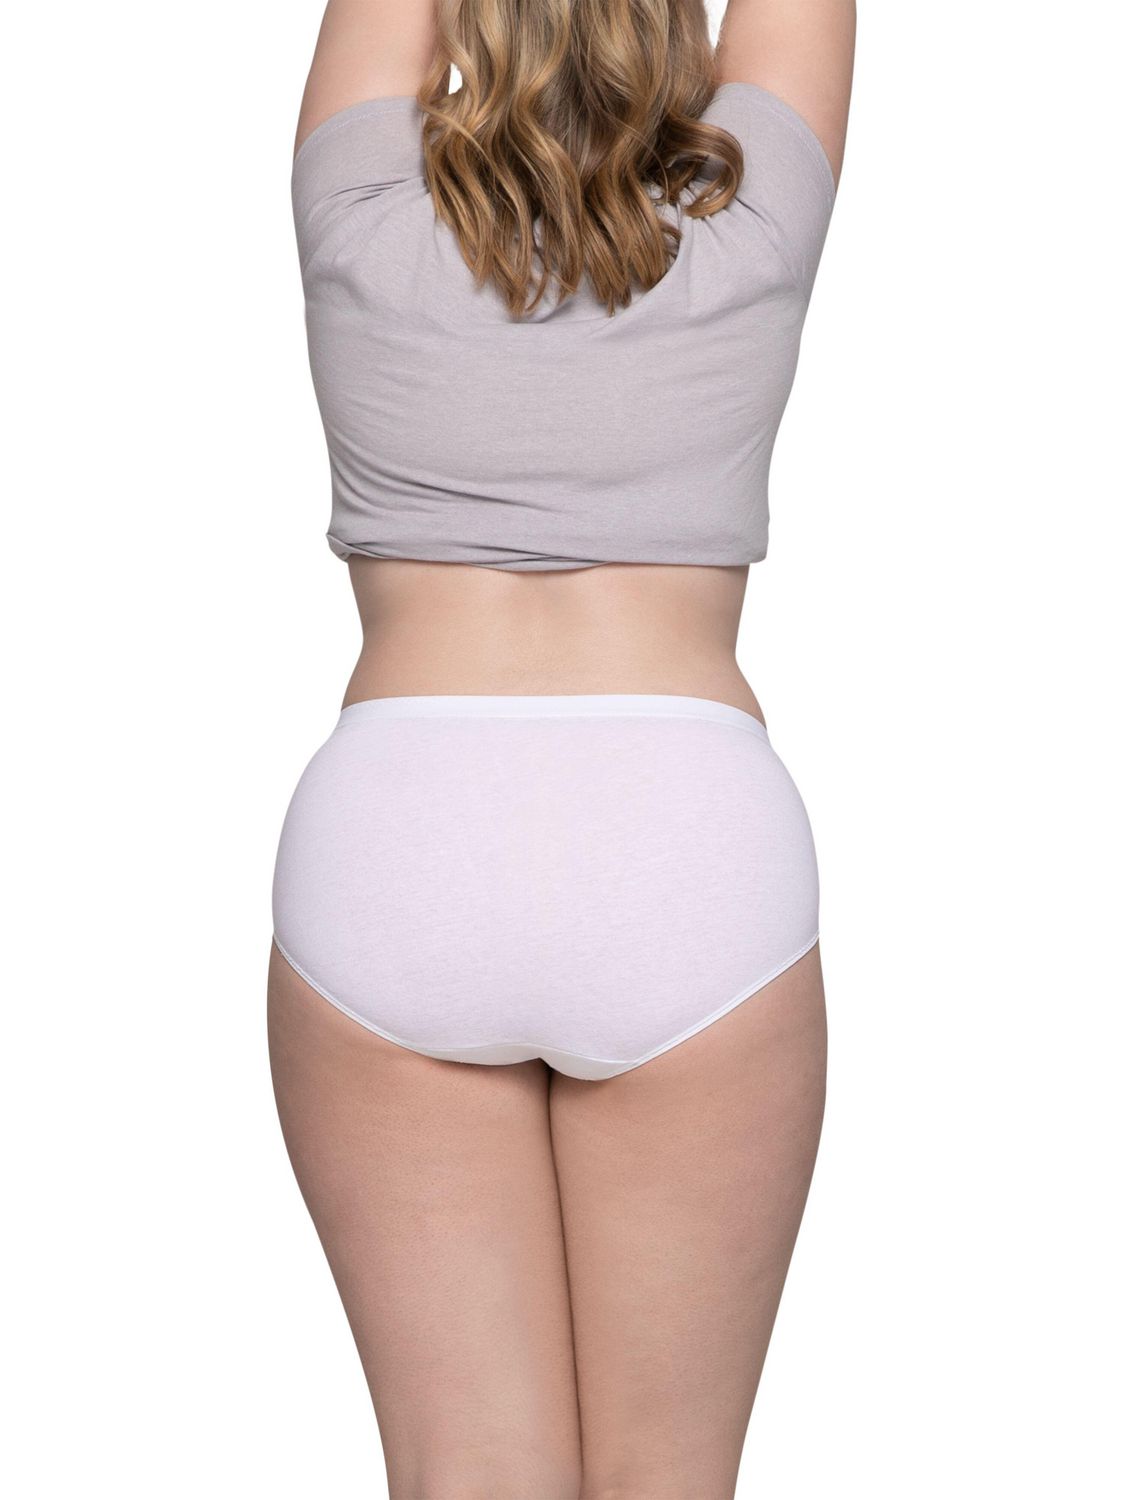 More Than 59,000 Shoppers Love This Cotton Underwear That 'Fits Like a  Dream